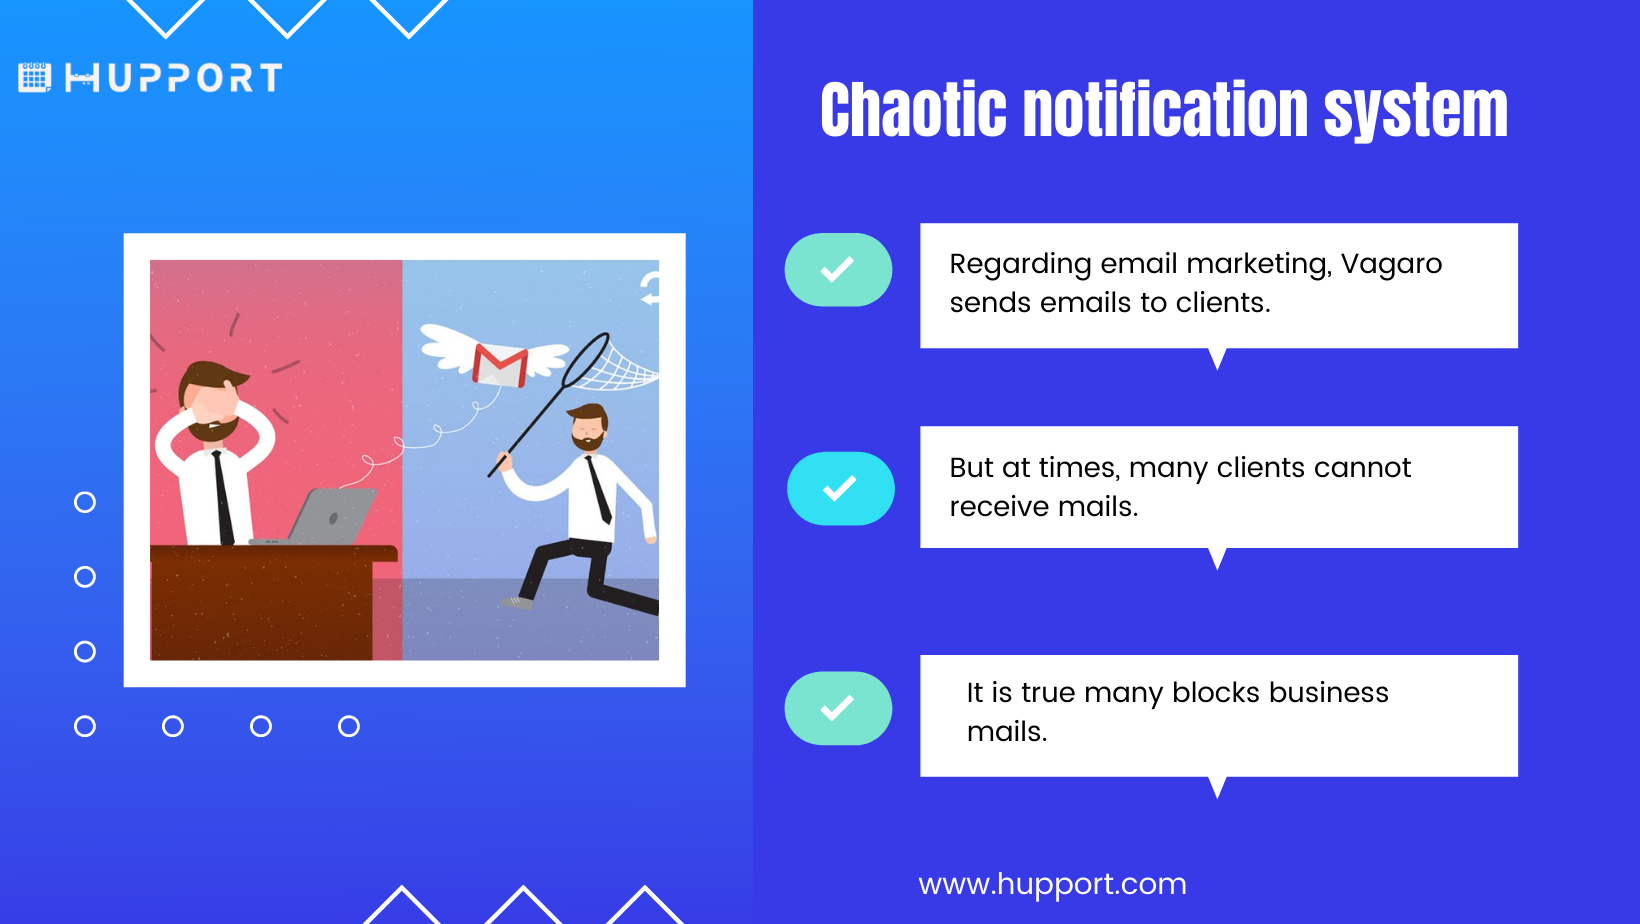 Chaotic notification system